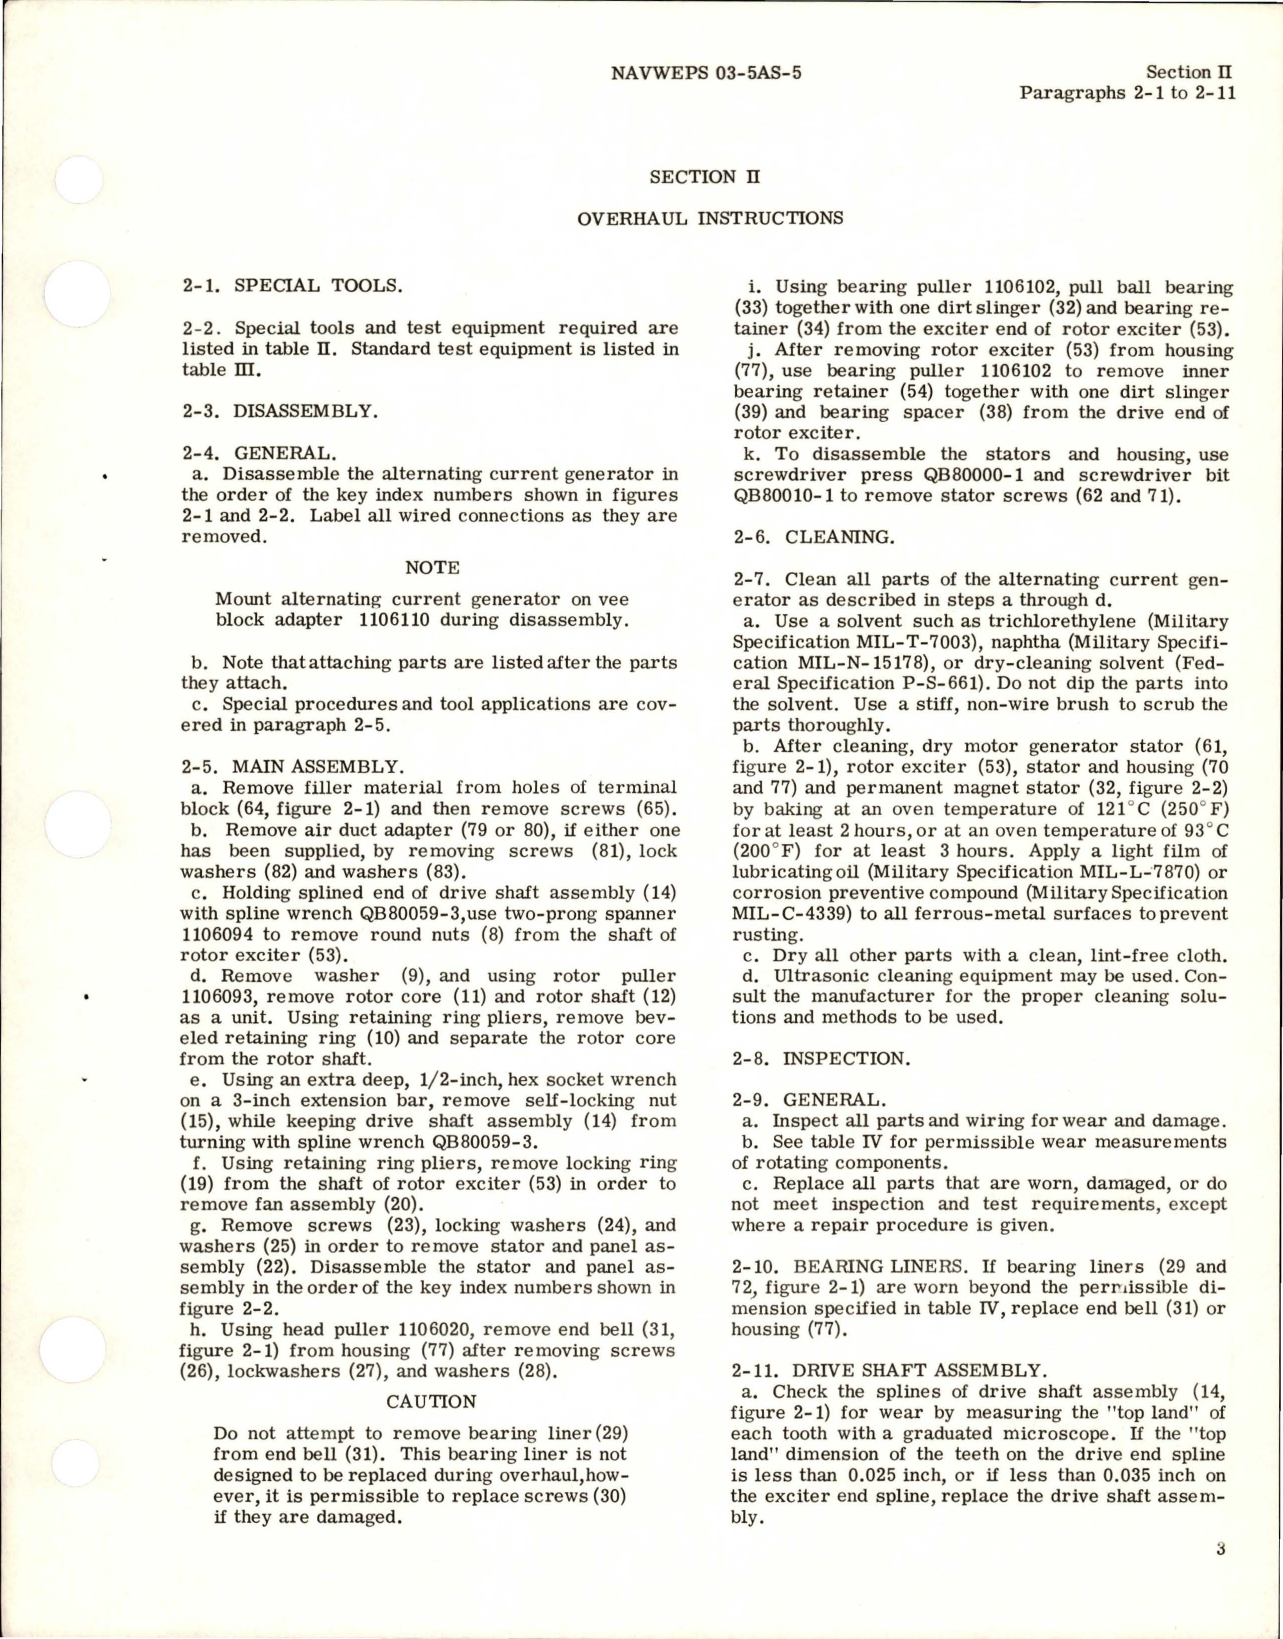 Sample page 7 from AirCorps Library document: Overhaul Instructions for Alternating Current Generator - Type 28B54-1-A and 28B54-9-A